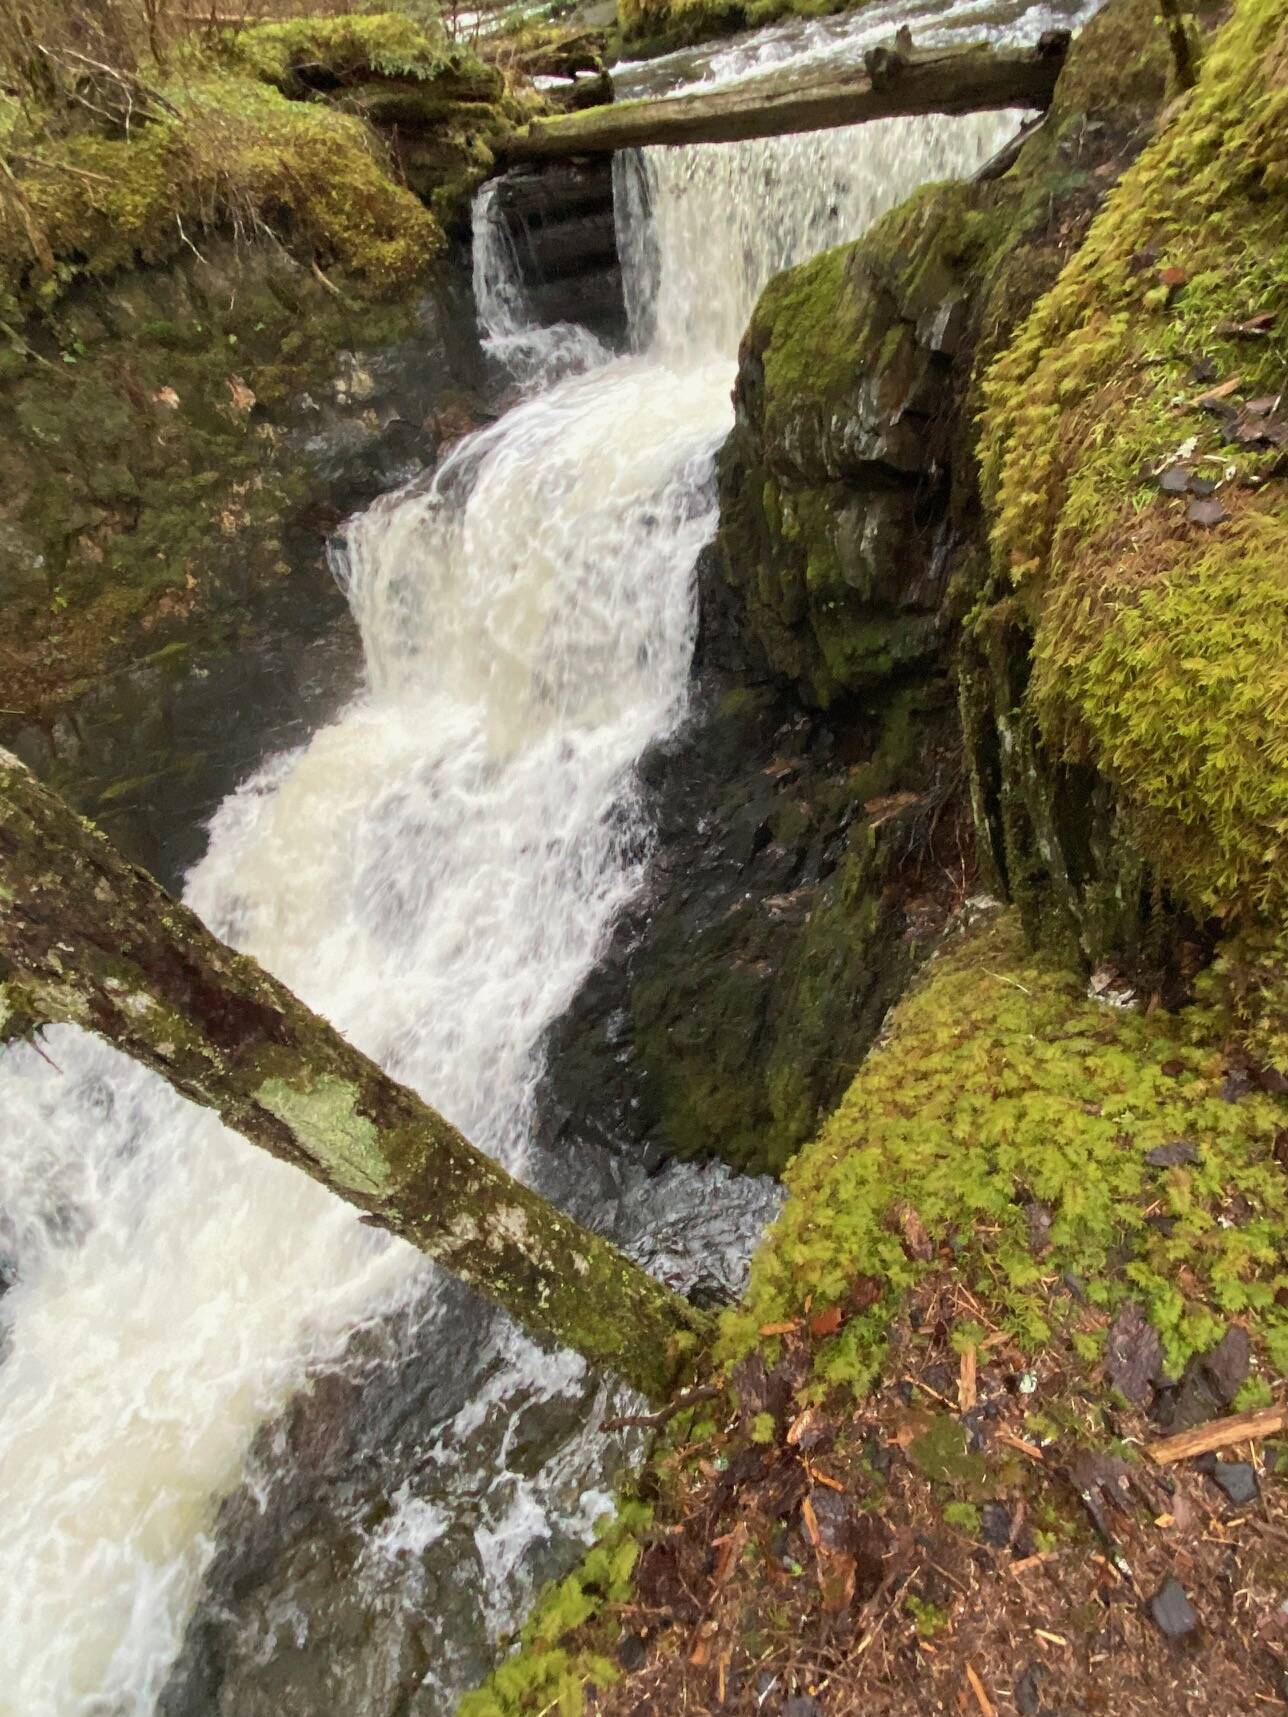 Paris Creek cascades forcefully down the mountainside after recent rain on Nov. 25. (Photo by Denise Carroll)